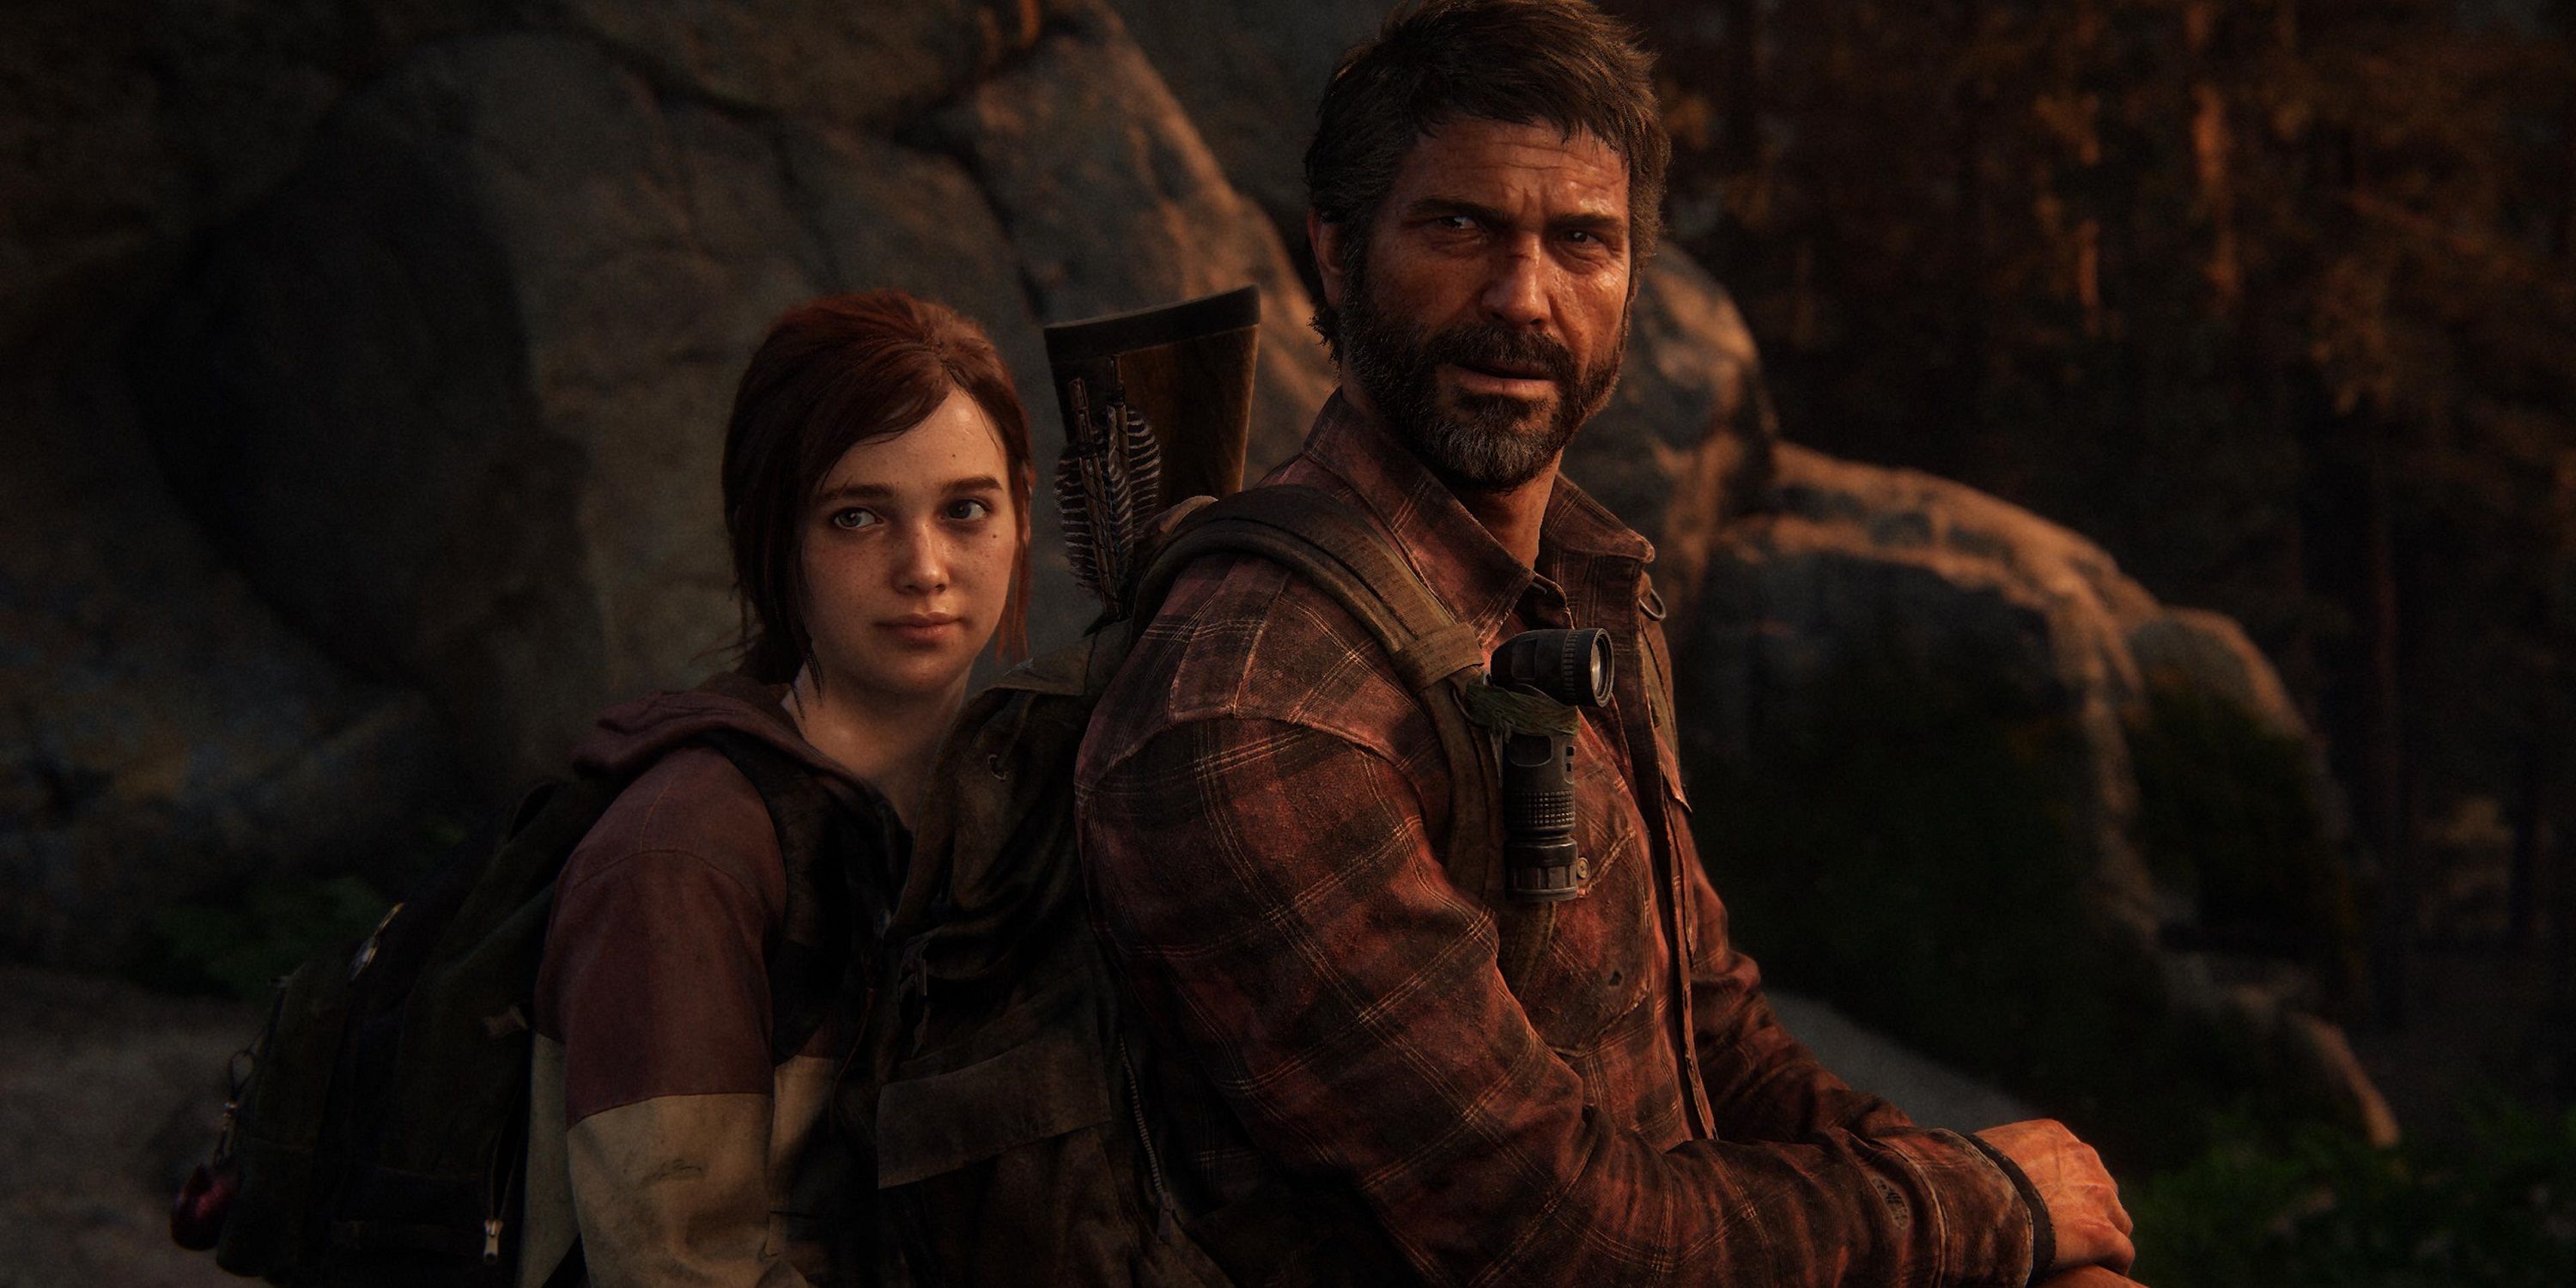 The Last of Us 1: All Chapters and How Long to Beat